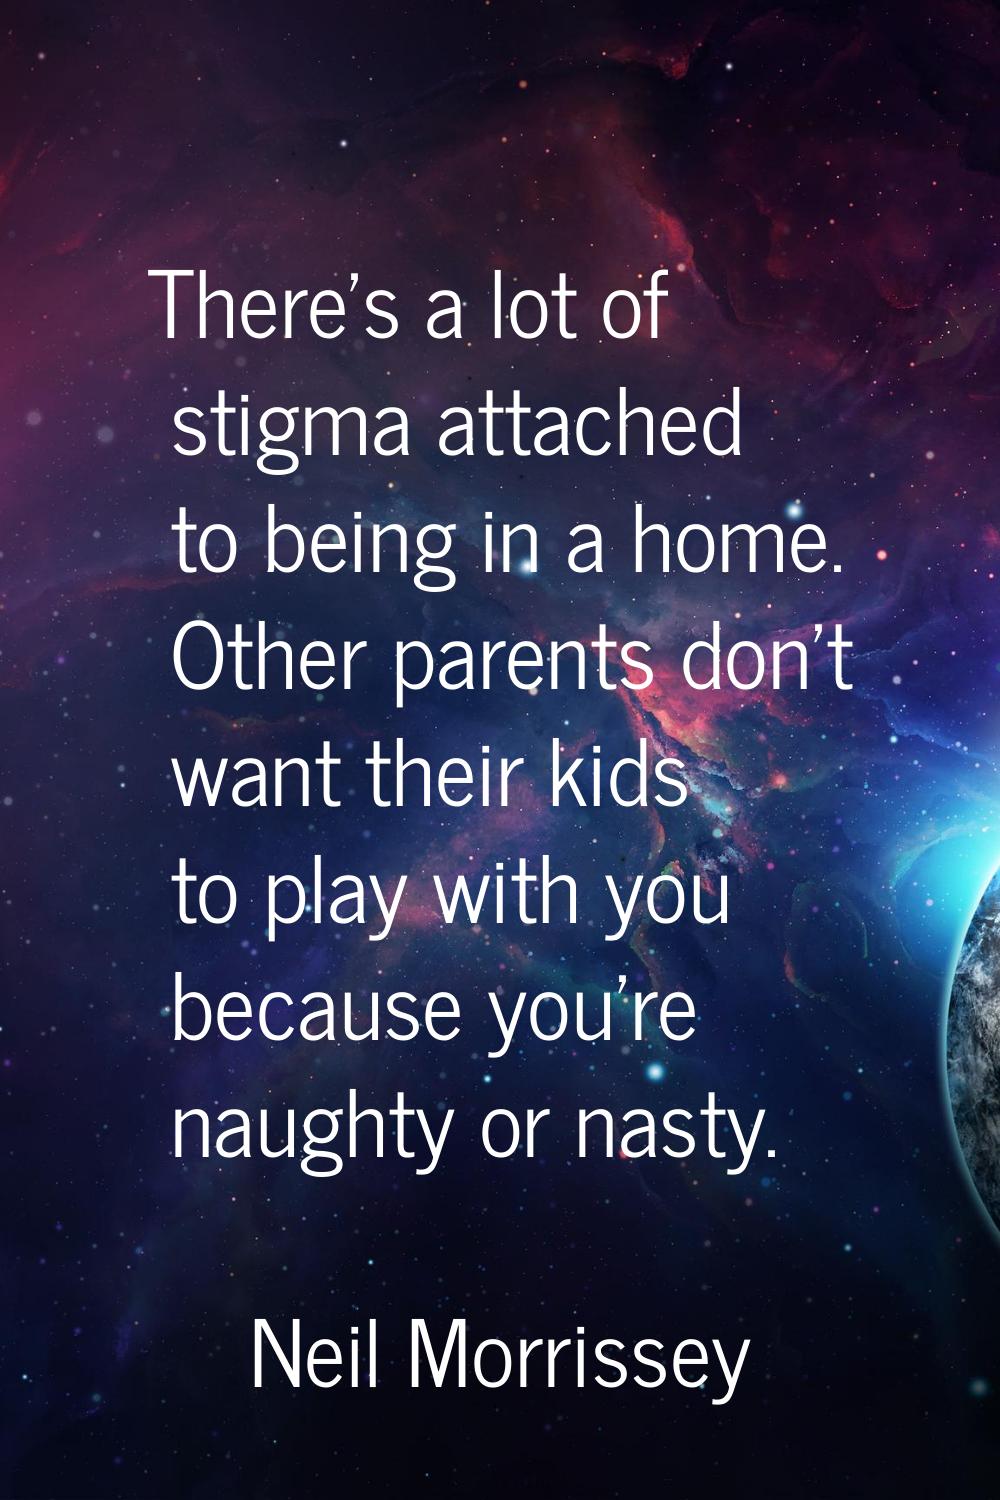 There's a lot of stigma attached to being in a home. Other parents don't want their kids to play wi